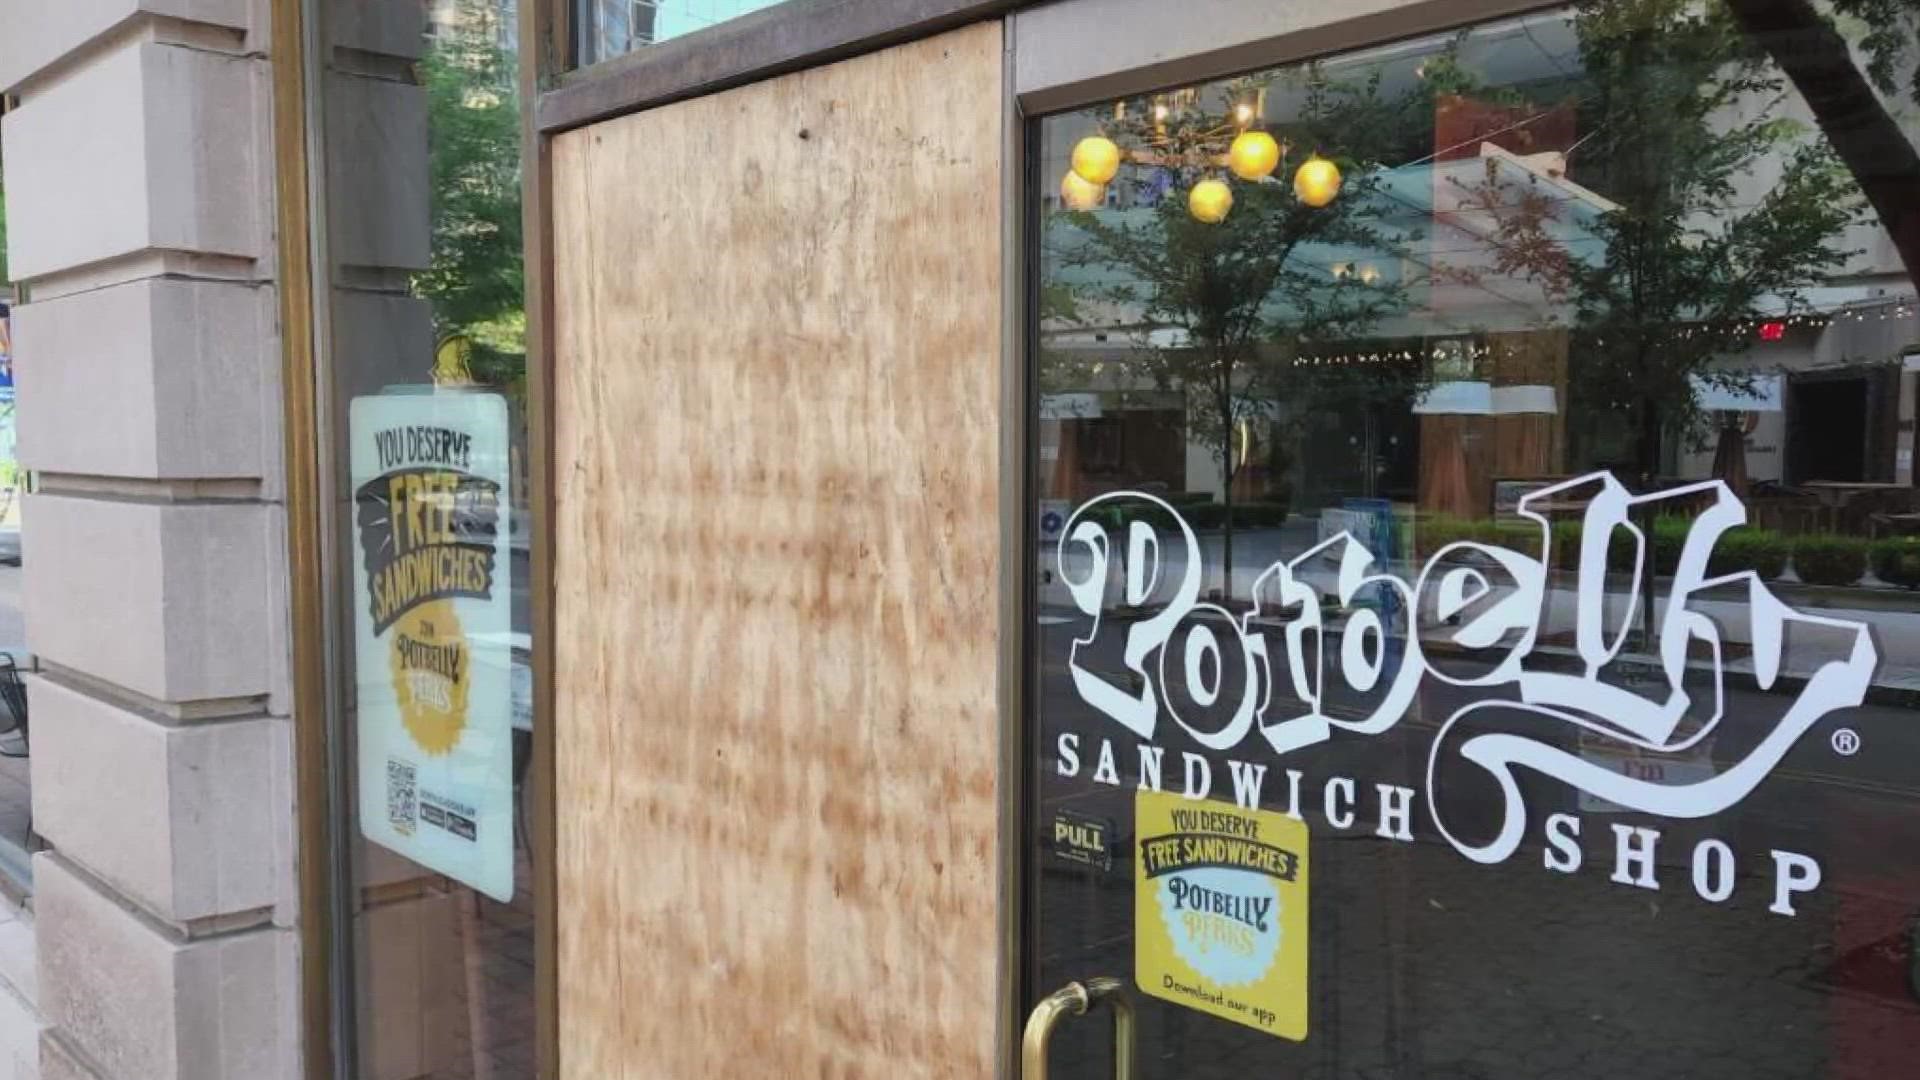 Downtown businesses have seen a rash of break-ins and many owners said it's time to start sending a message of support to police.